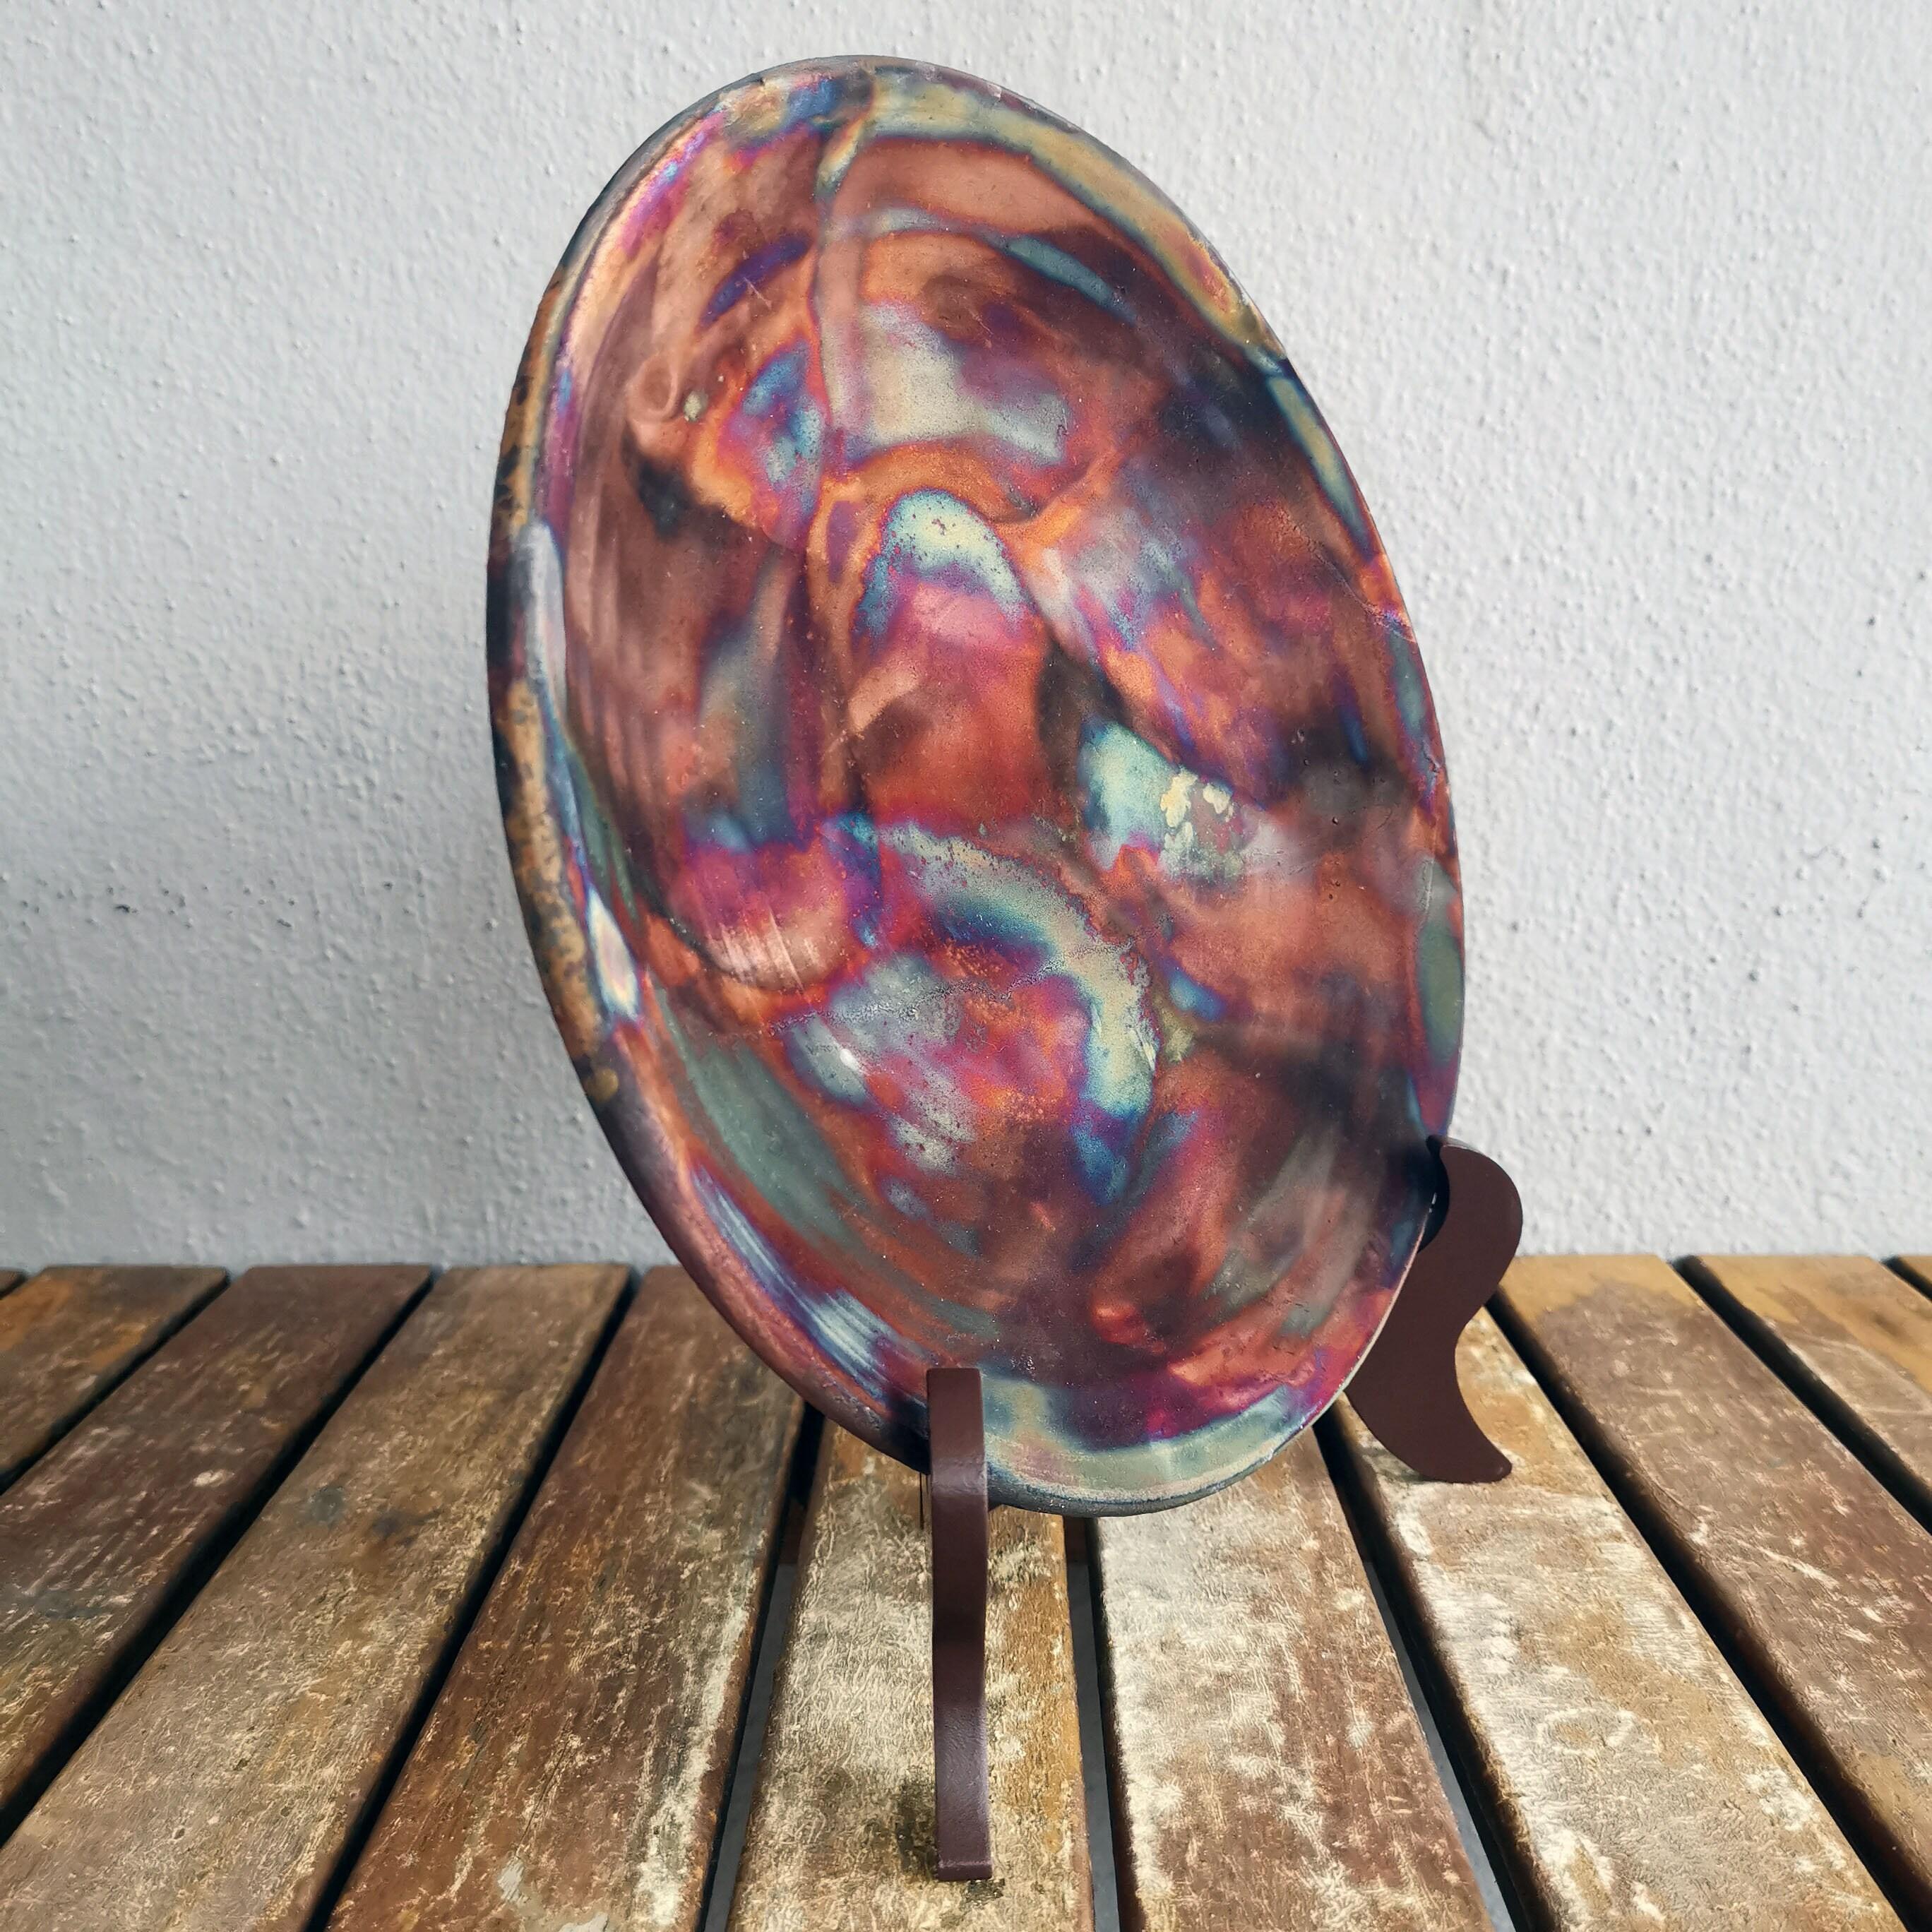 Sara ~ (皿) plate

Our Sara decorative raku pottery plates are an expression of Raku in one of its most visible forms, a flat circular surface. Our Sara plates are best used hanging on your wall as a statement piece, a commemorative award, or as a